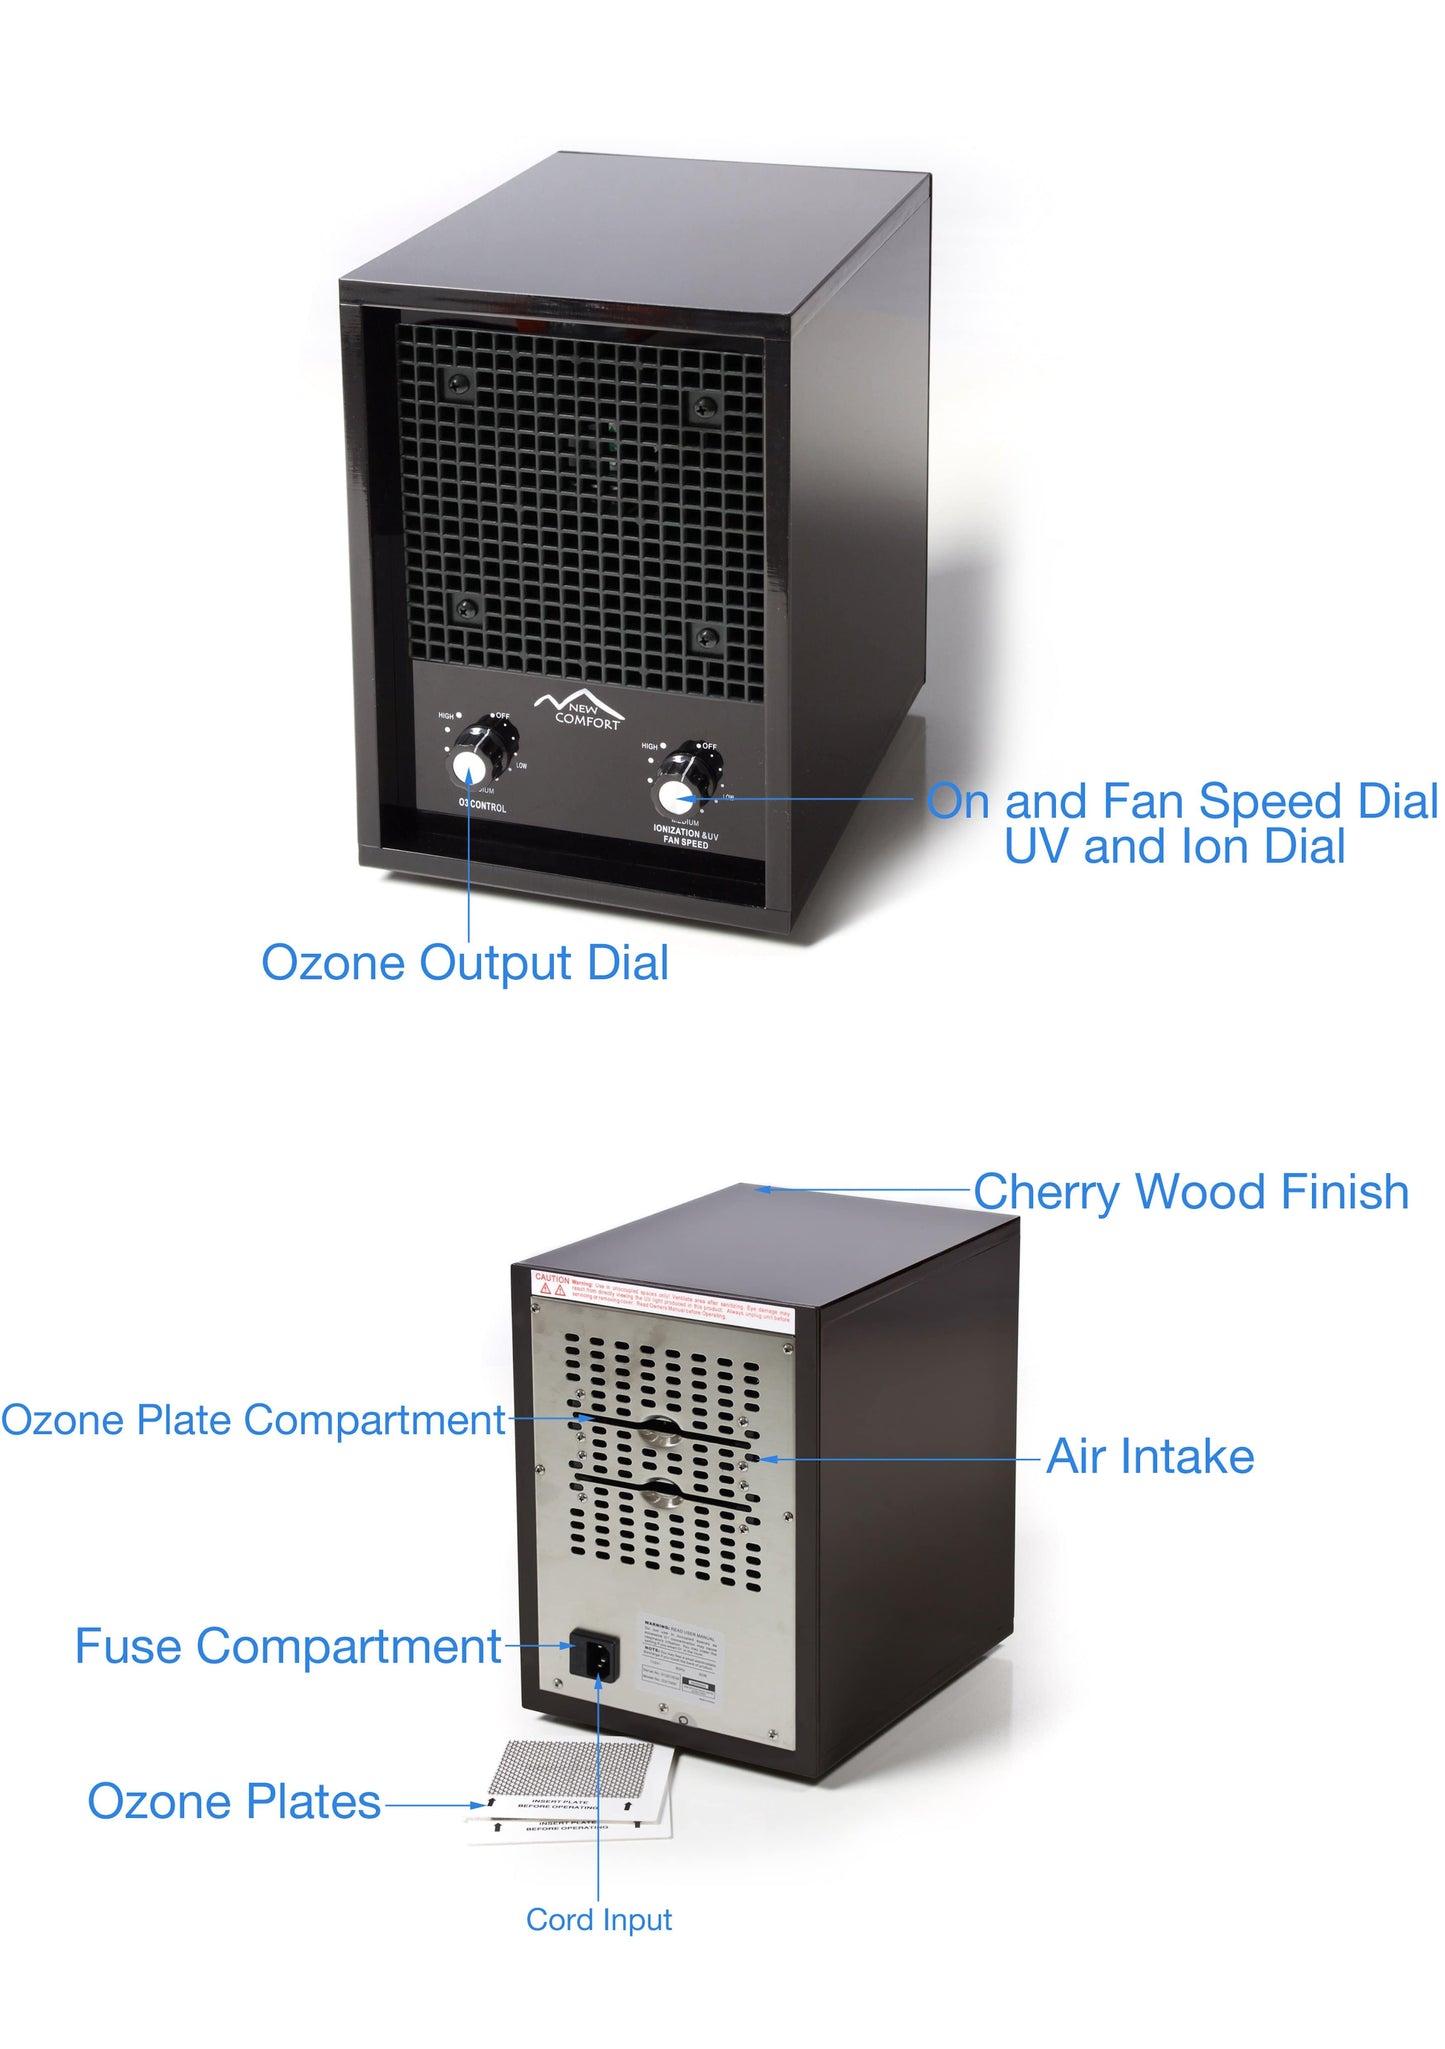 New Comfort 03-1000 Germ/Odor Eliminating Ozone Generating Air Purifier by Prolux